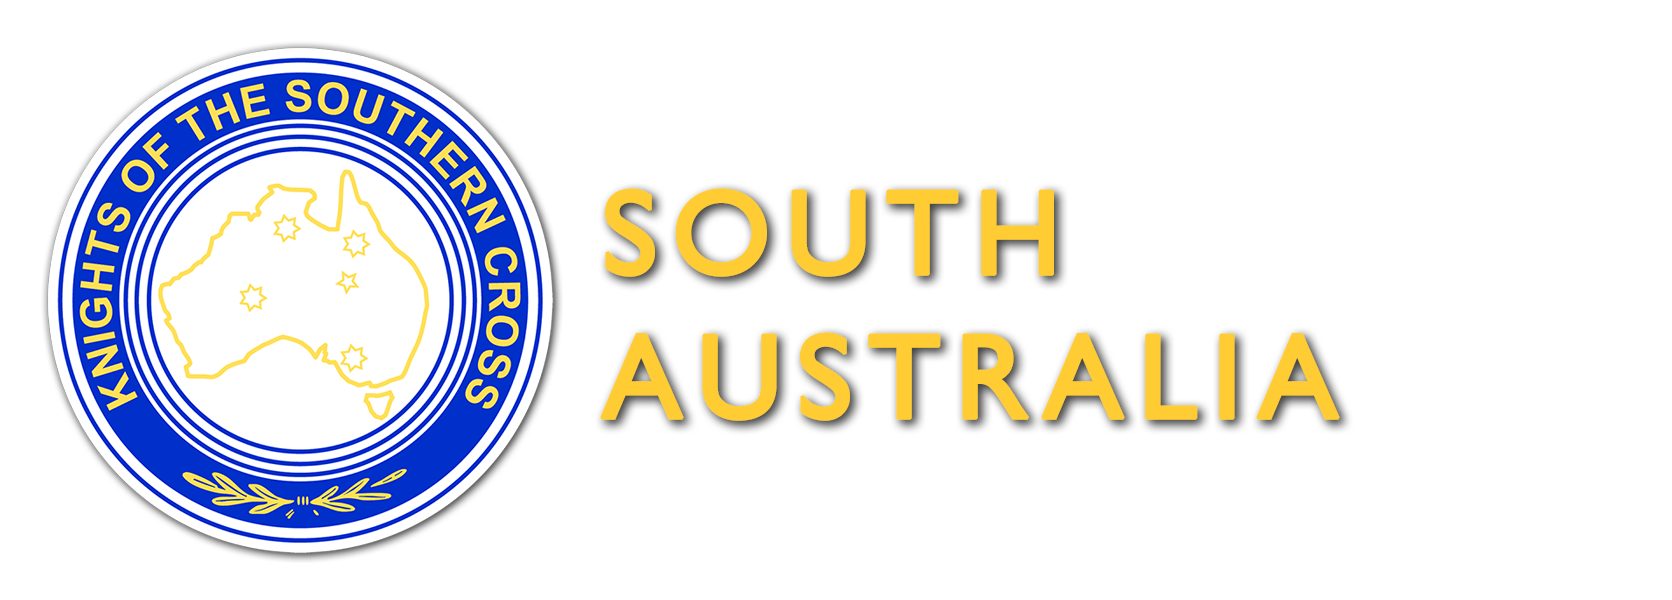 Knights of the Southern Cross South Australia